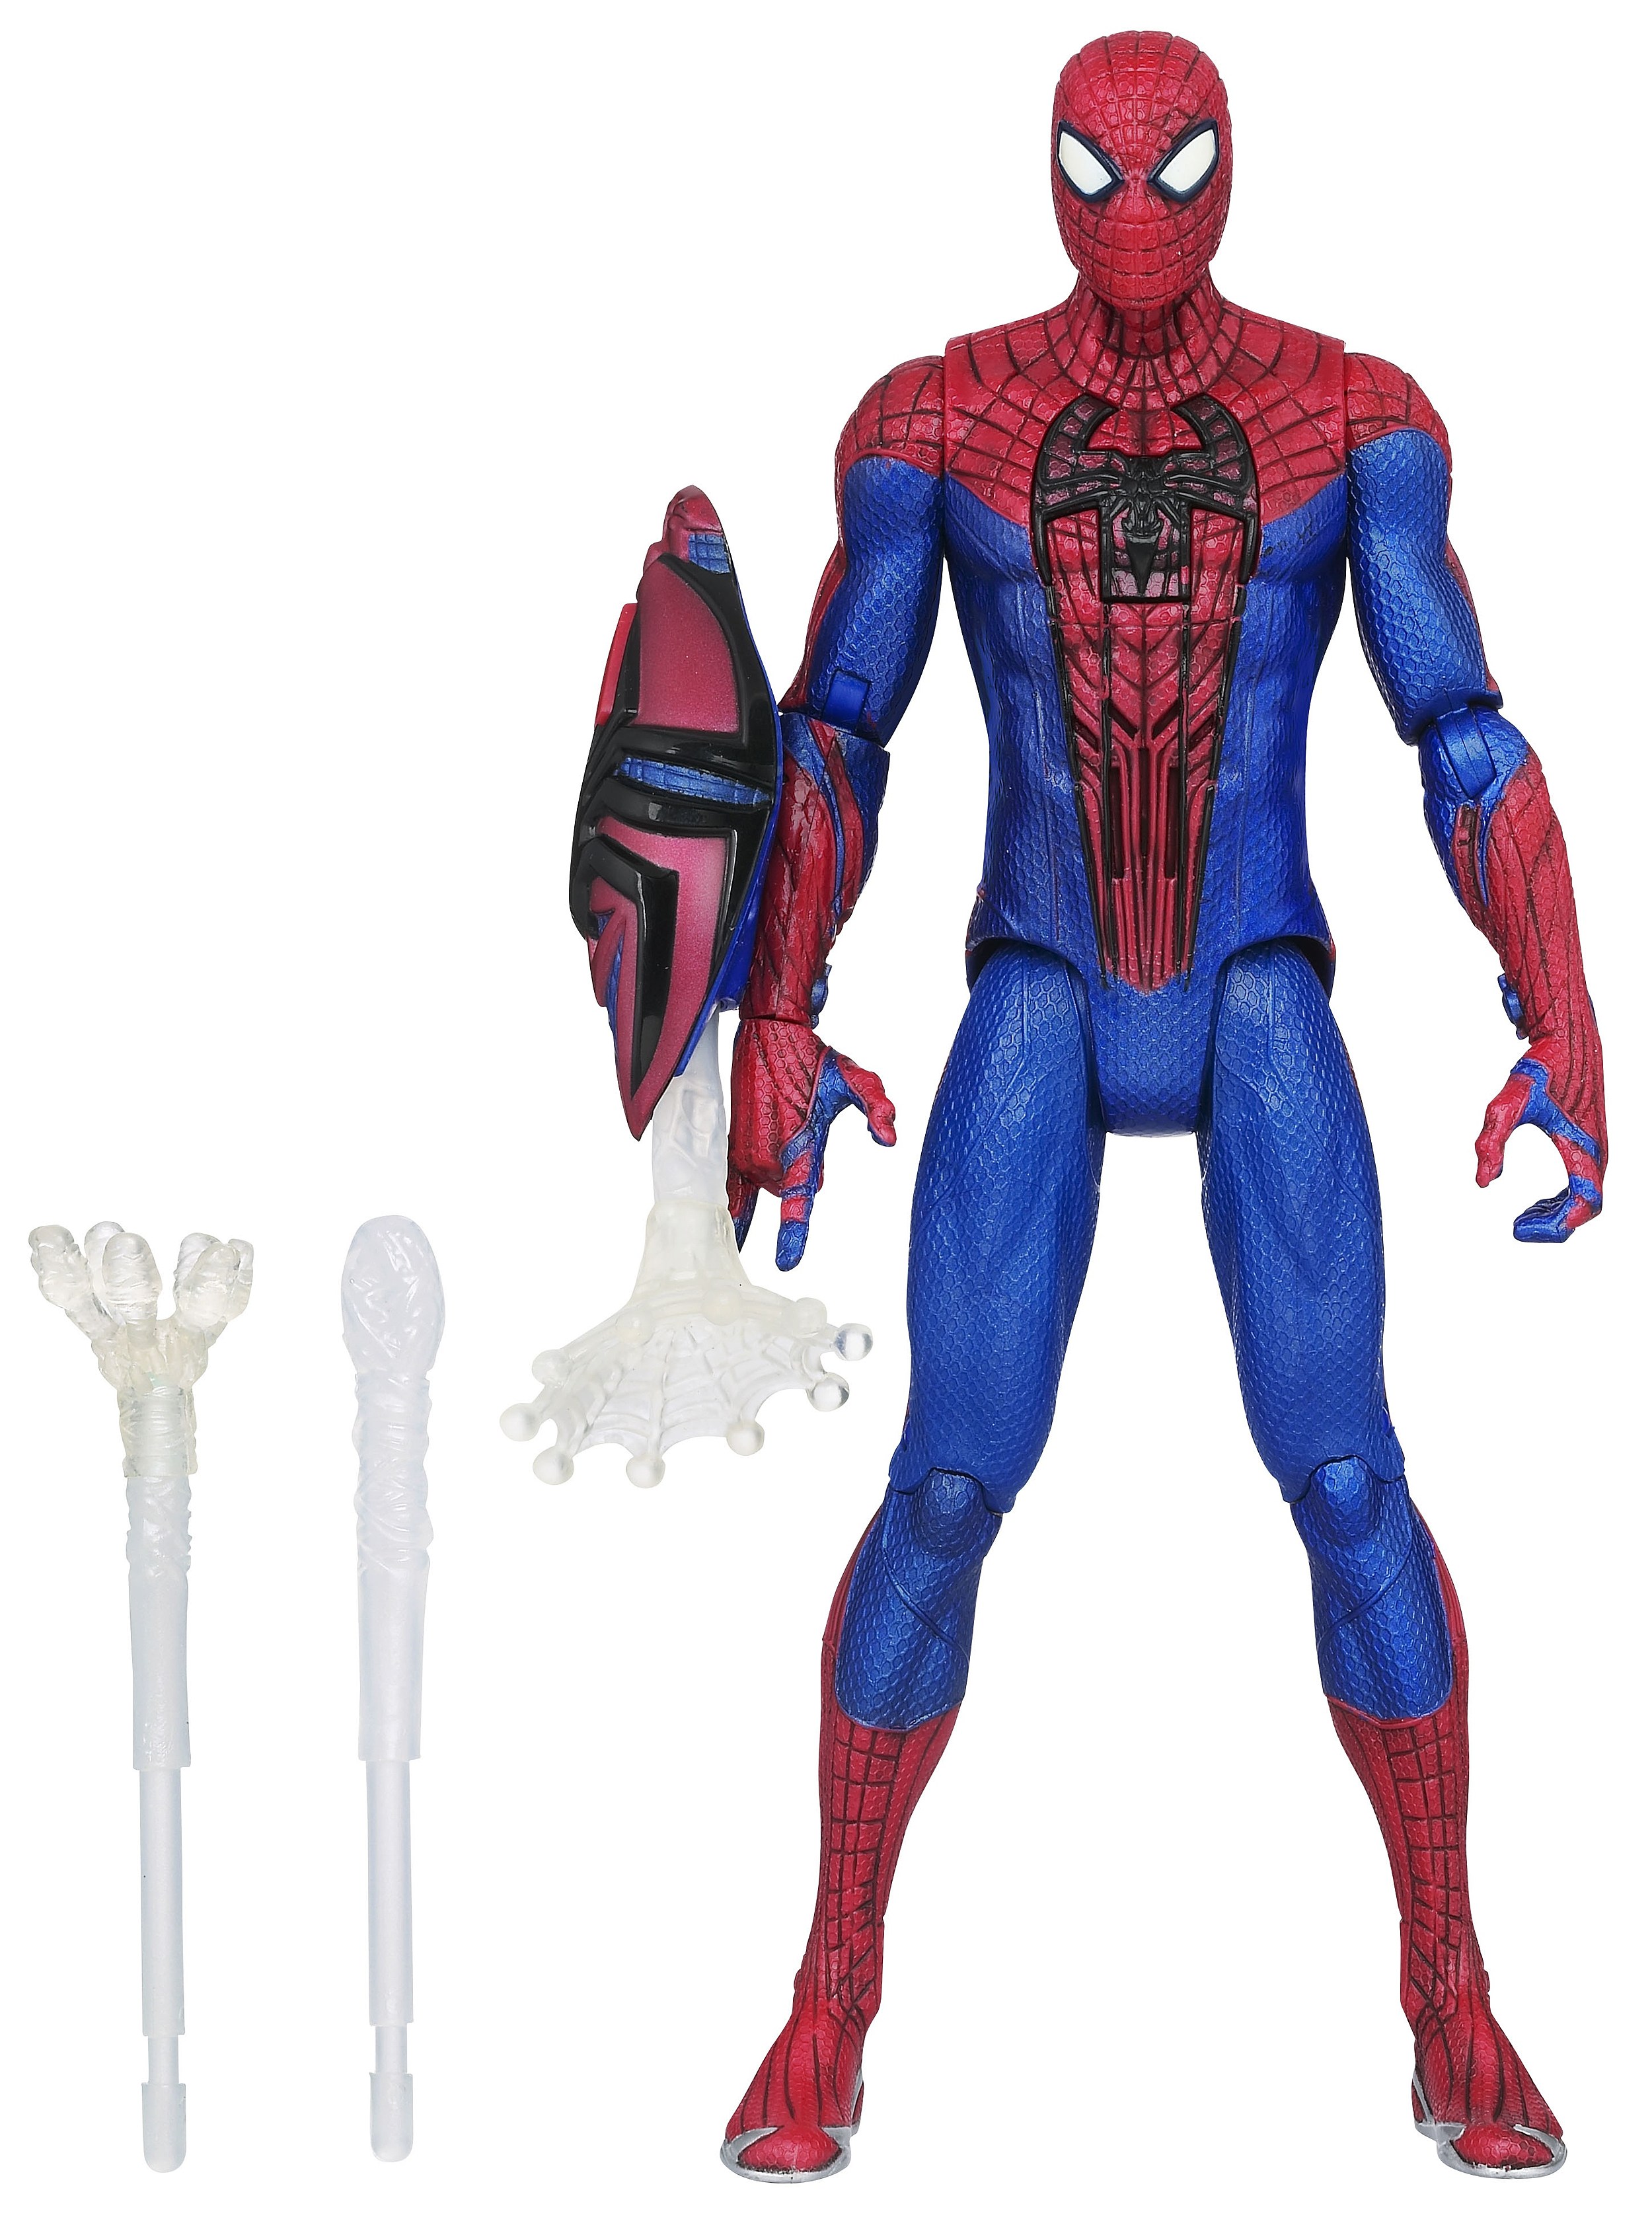 ‘The Amazing SpiderMan’ Movie Toy Images Arrive [Toy Fair 2012]